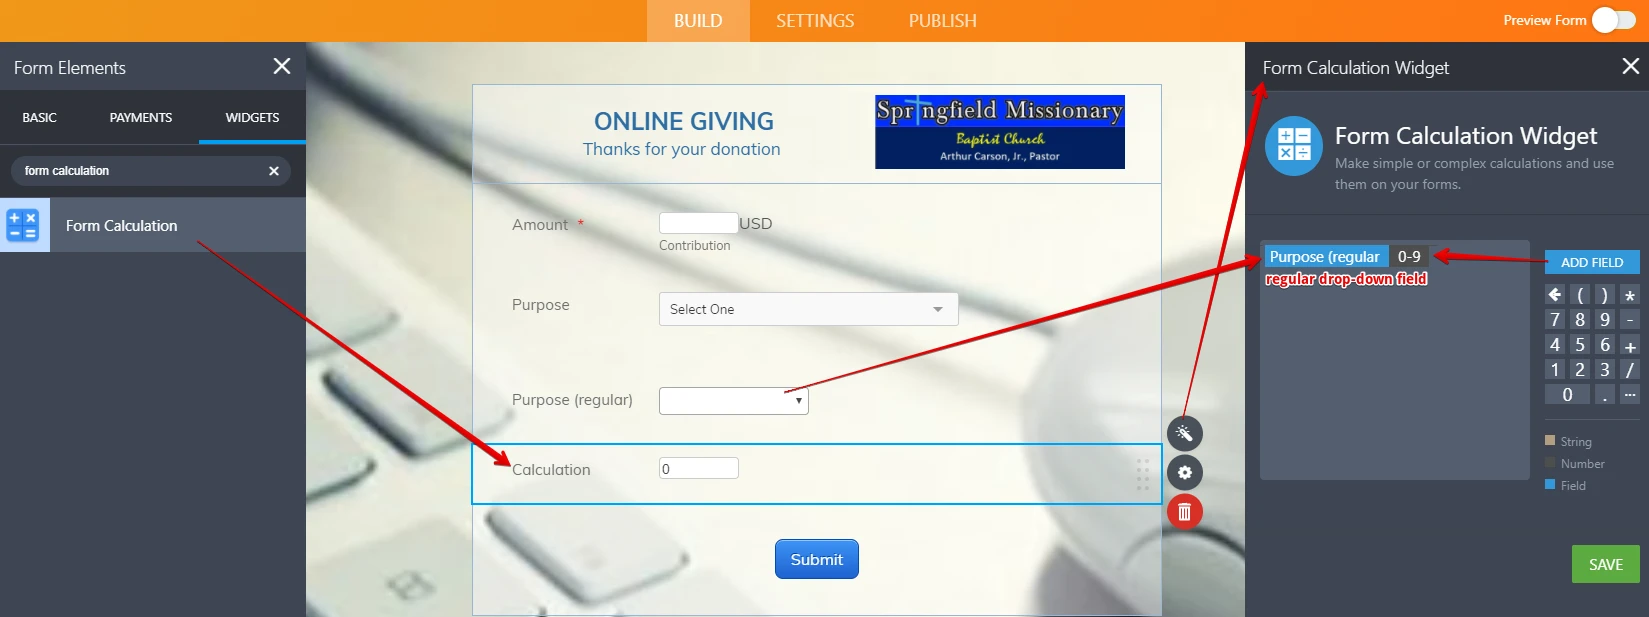 PayPal Donation Form: How do I get selected purpose item transferred to Paypal? Image 2 Screenshot 51